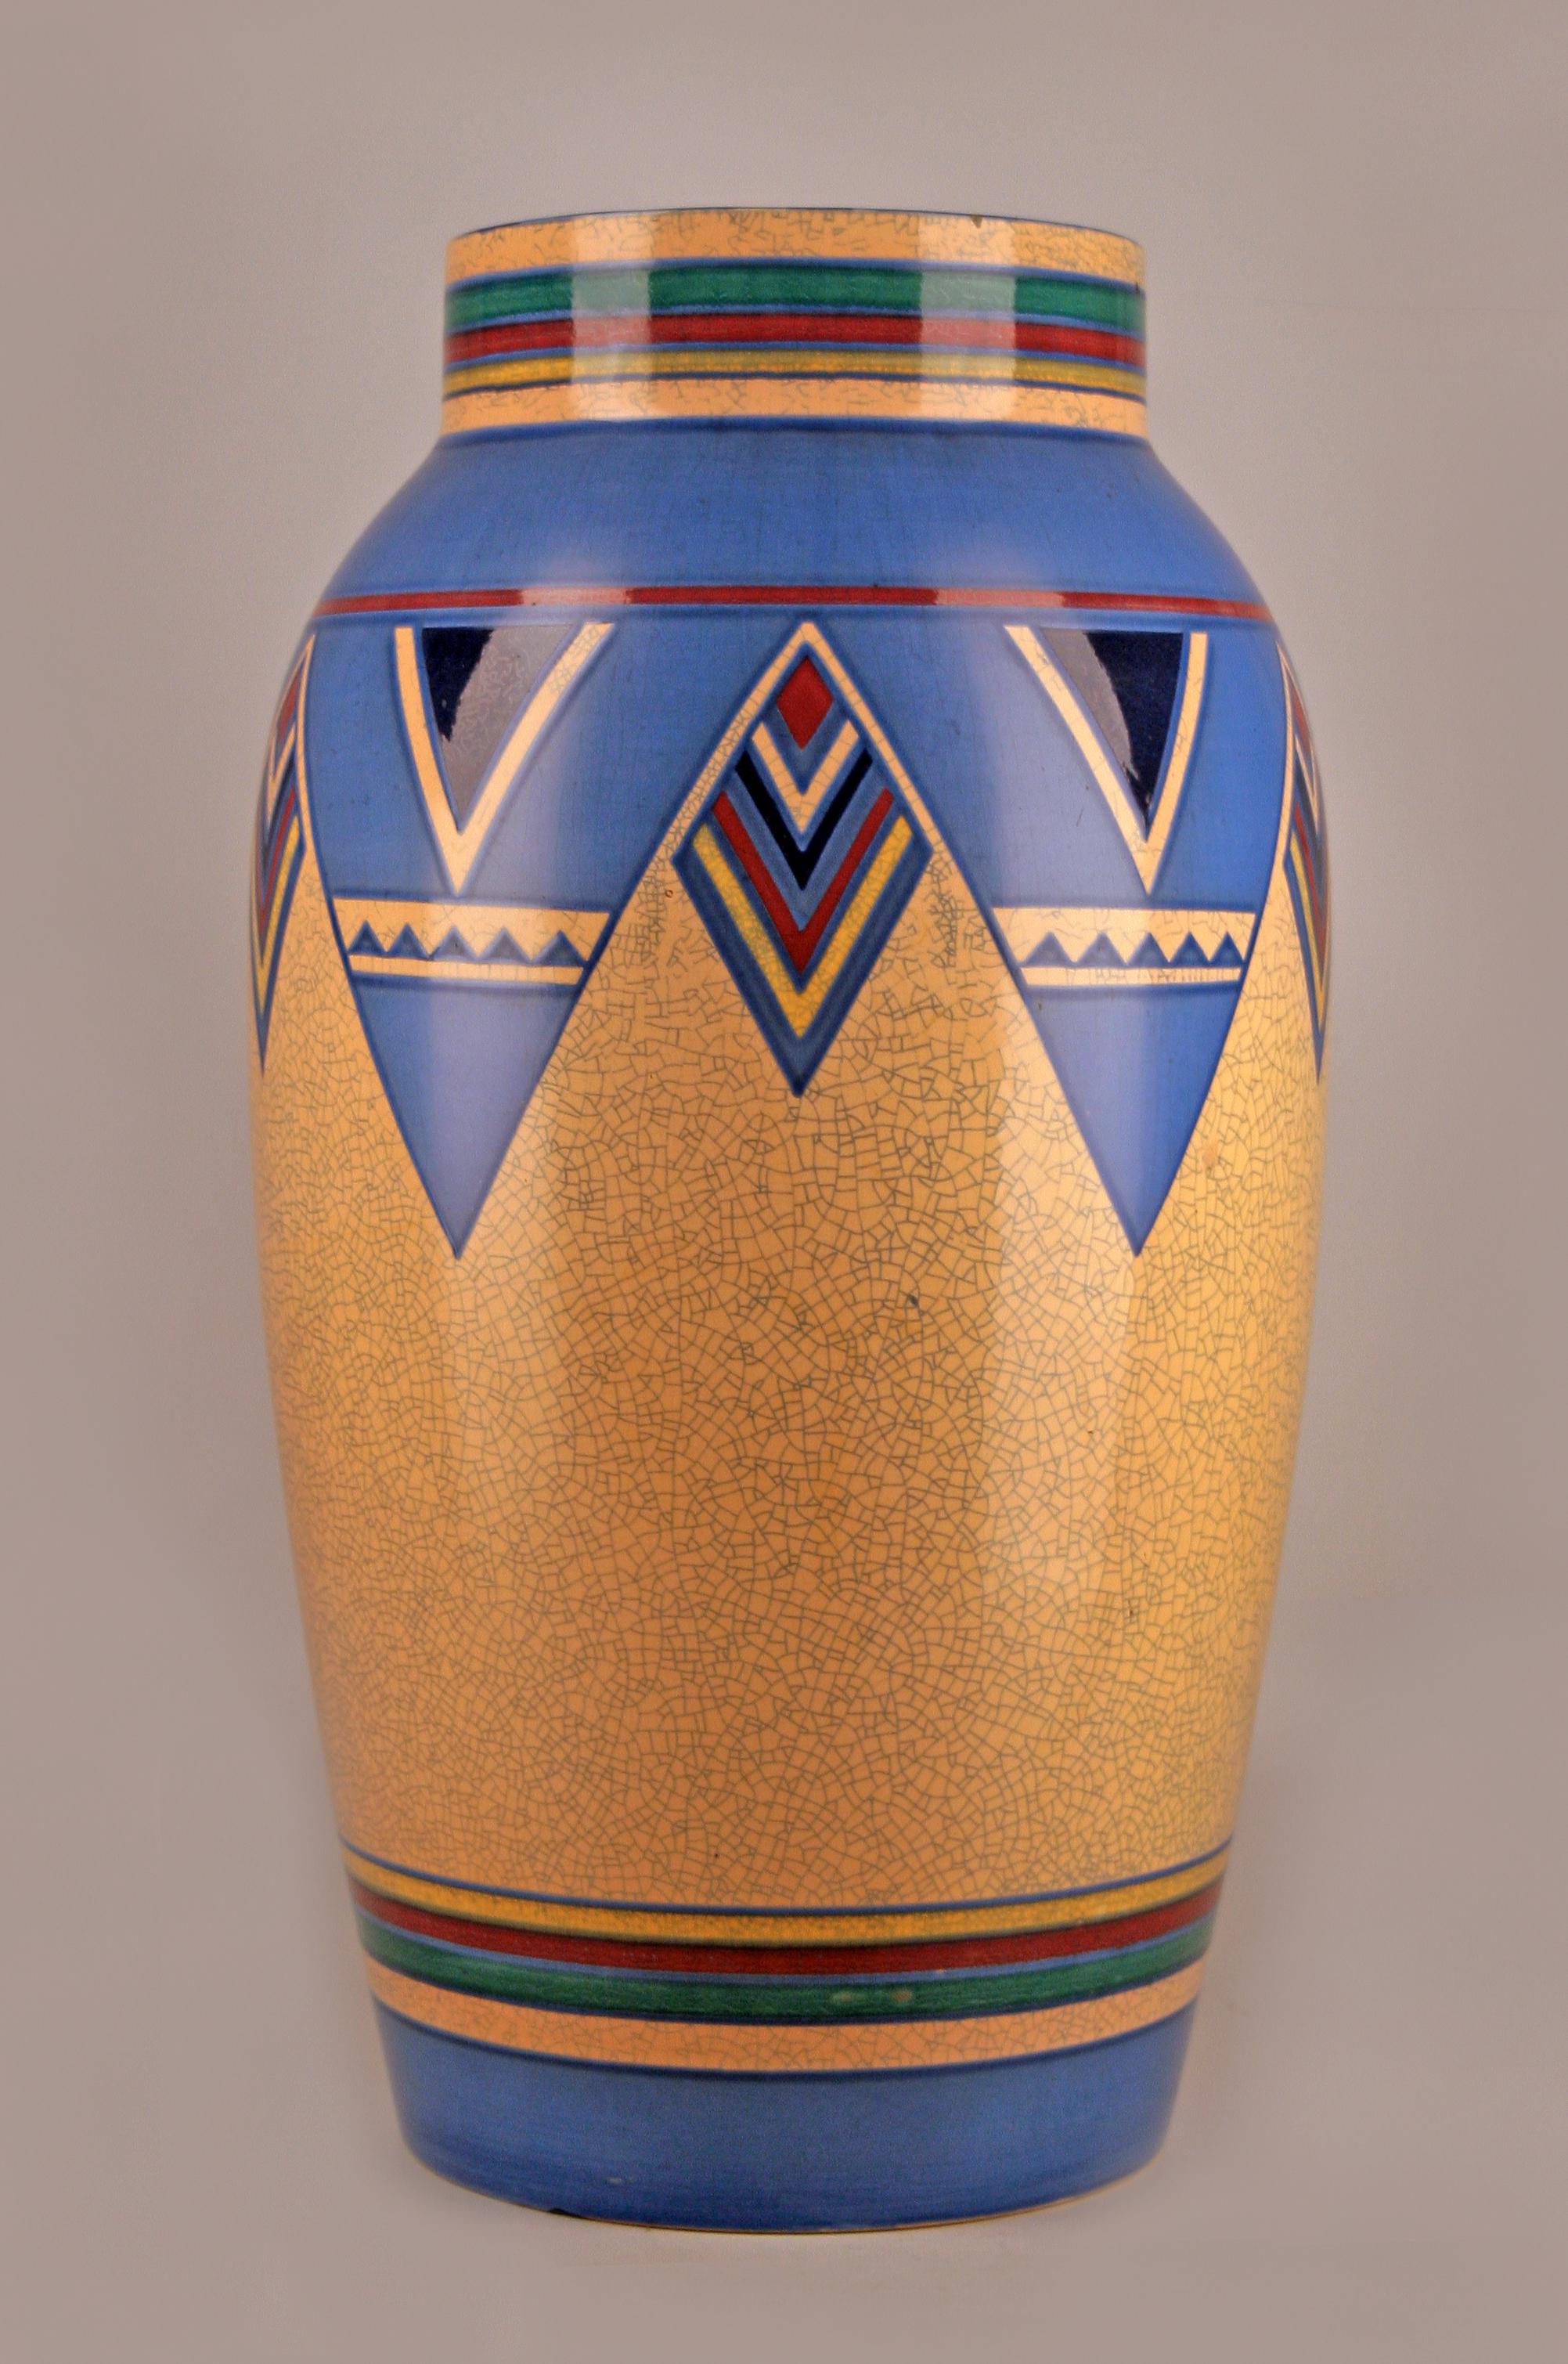 Mid-20th Century Modern Post-War Painted Glazed Ceramic Vase from West Germany For Sale 4